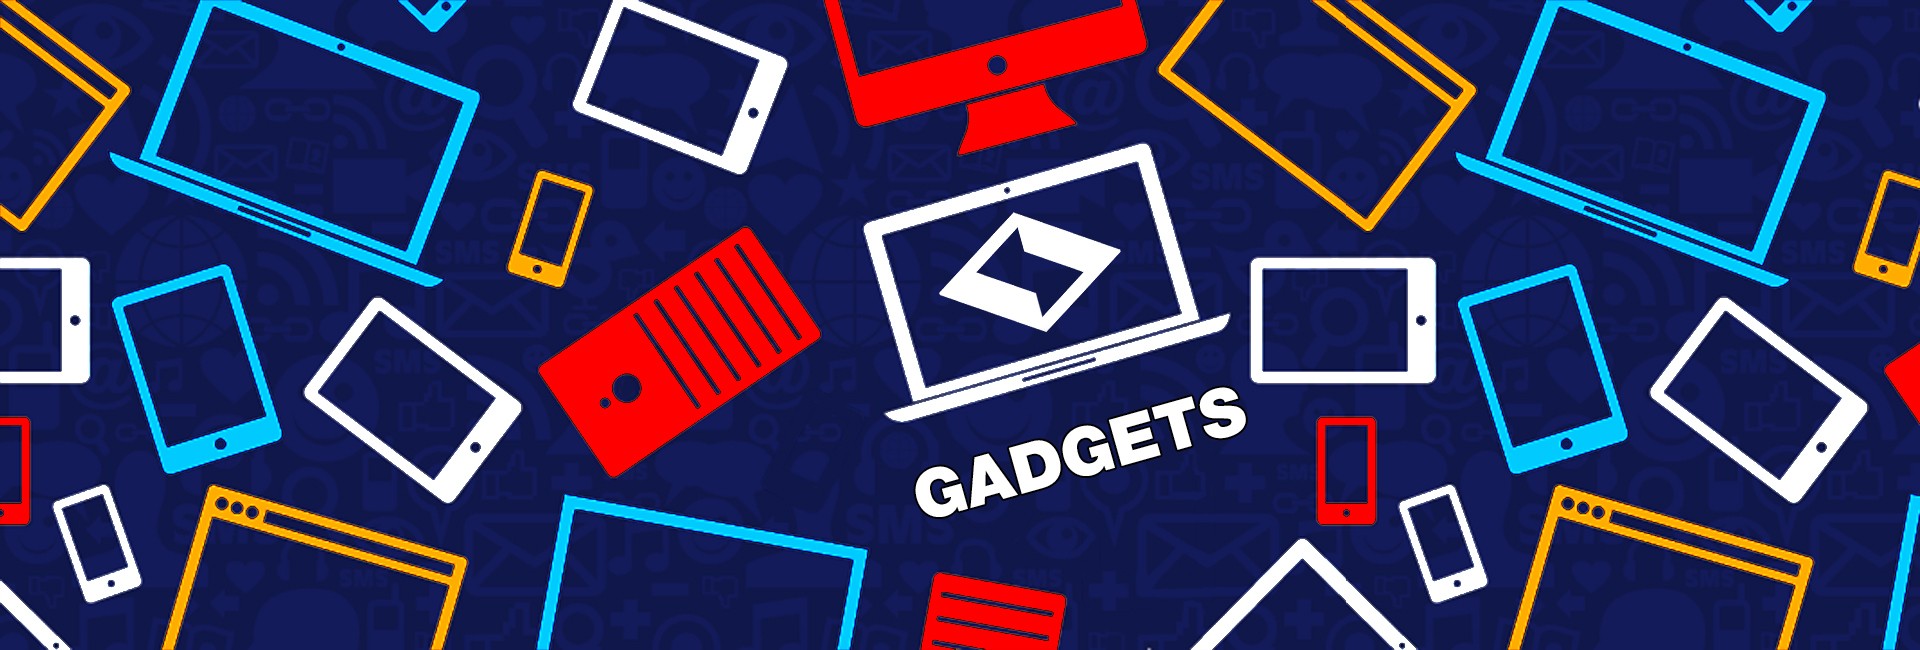 Gadgets / Toys / Games